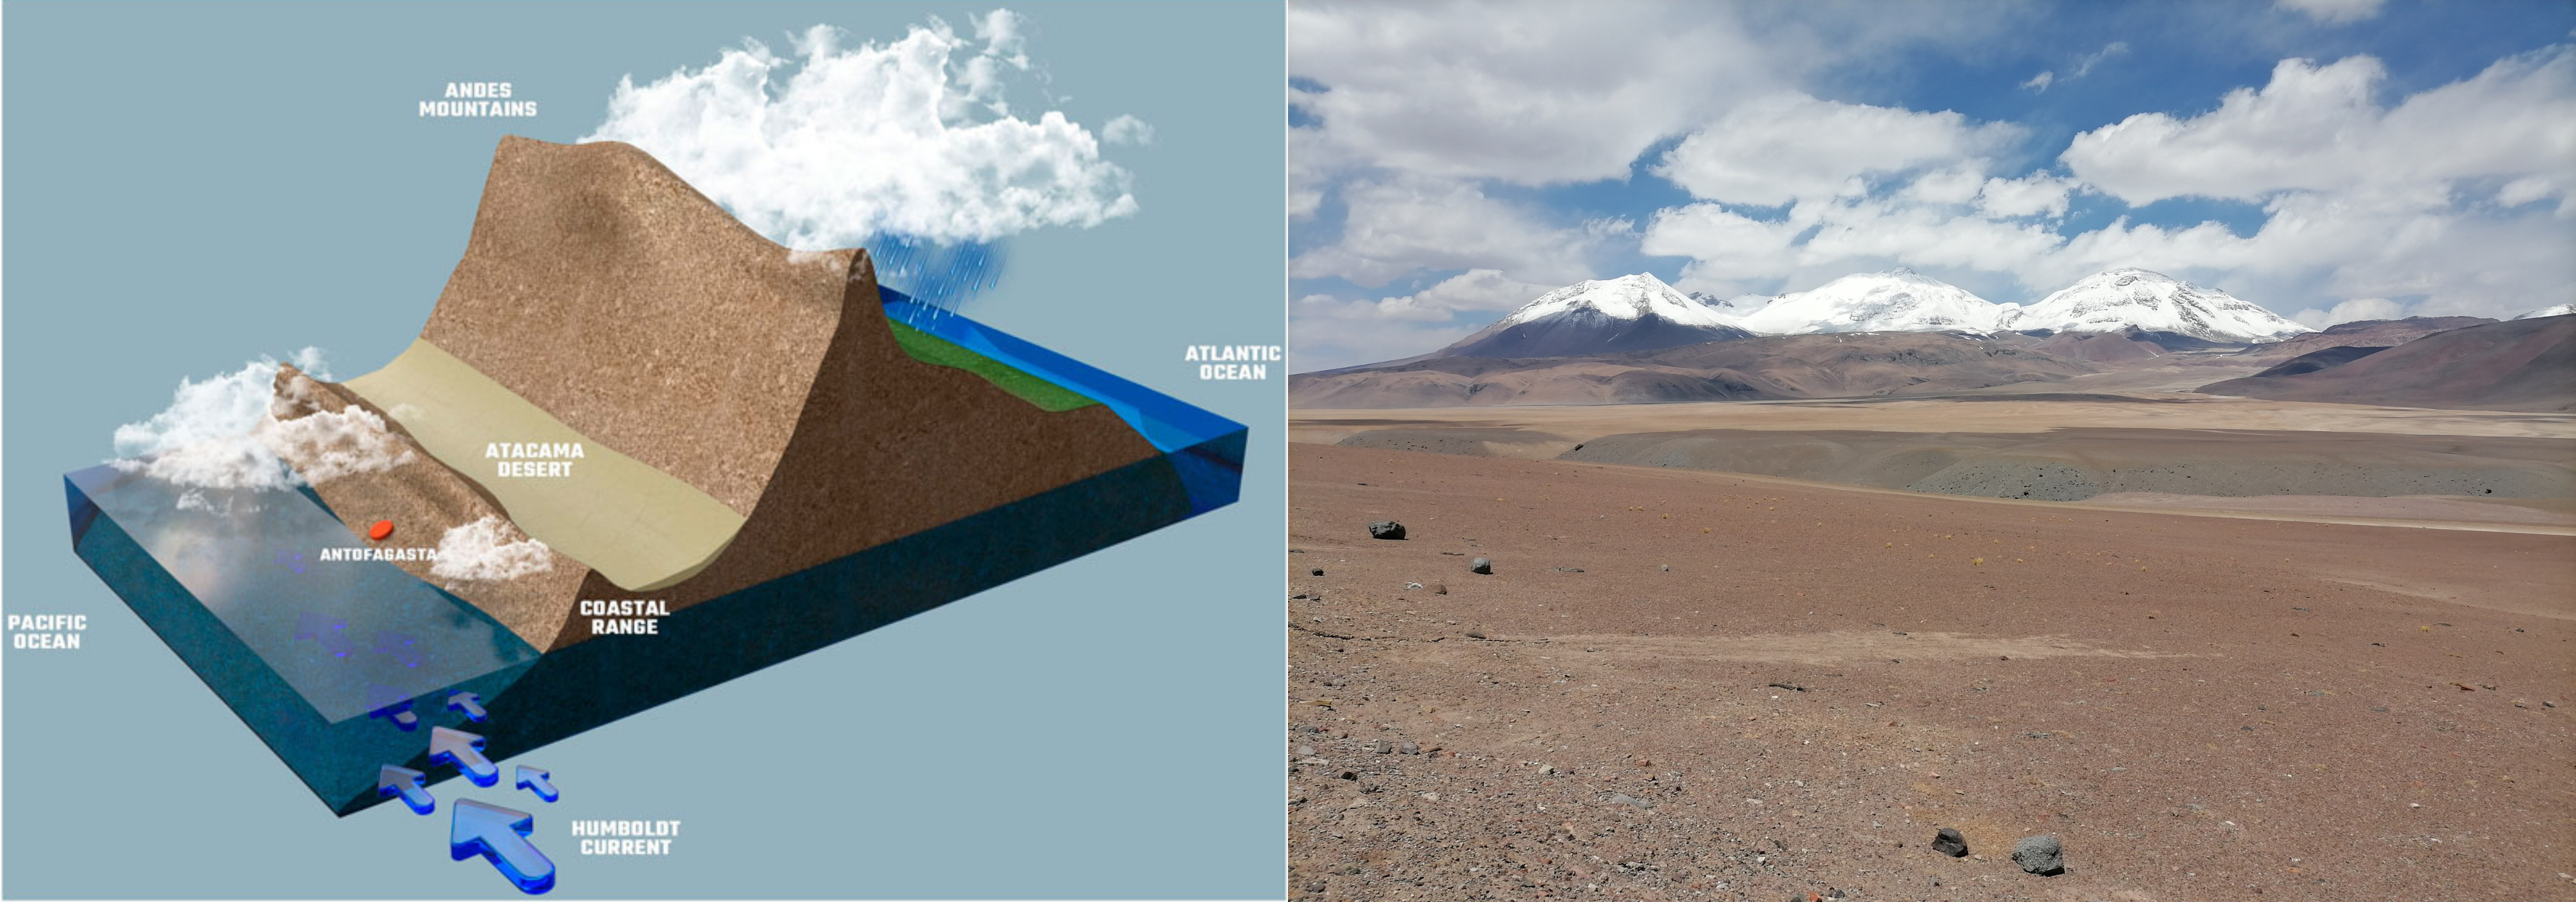 Relationship of the Andes, Atacama Desert, and Humboldt Current; dry landscape with snow-capped mountains in distance